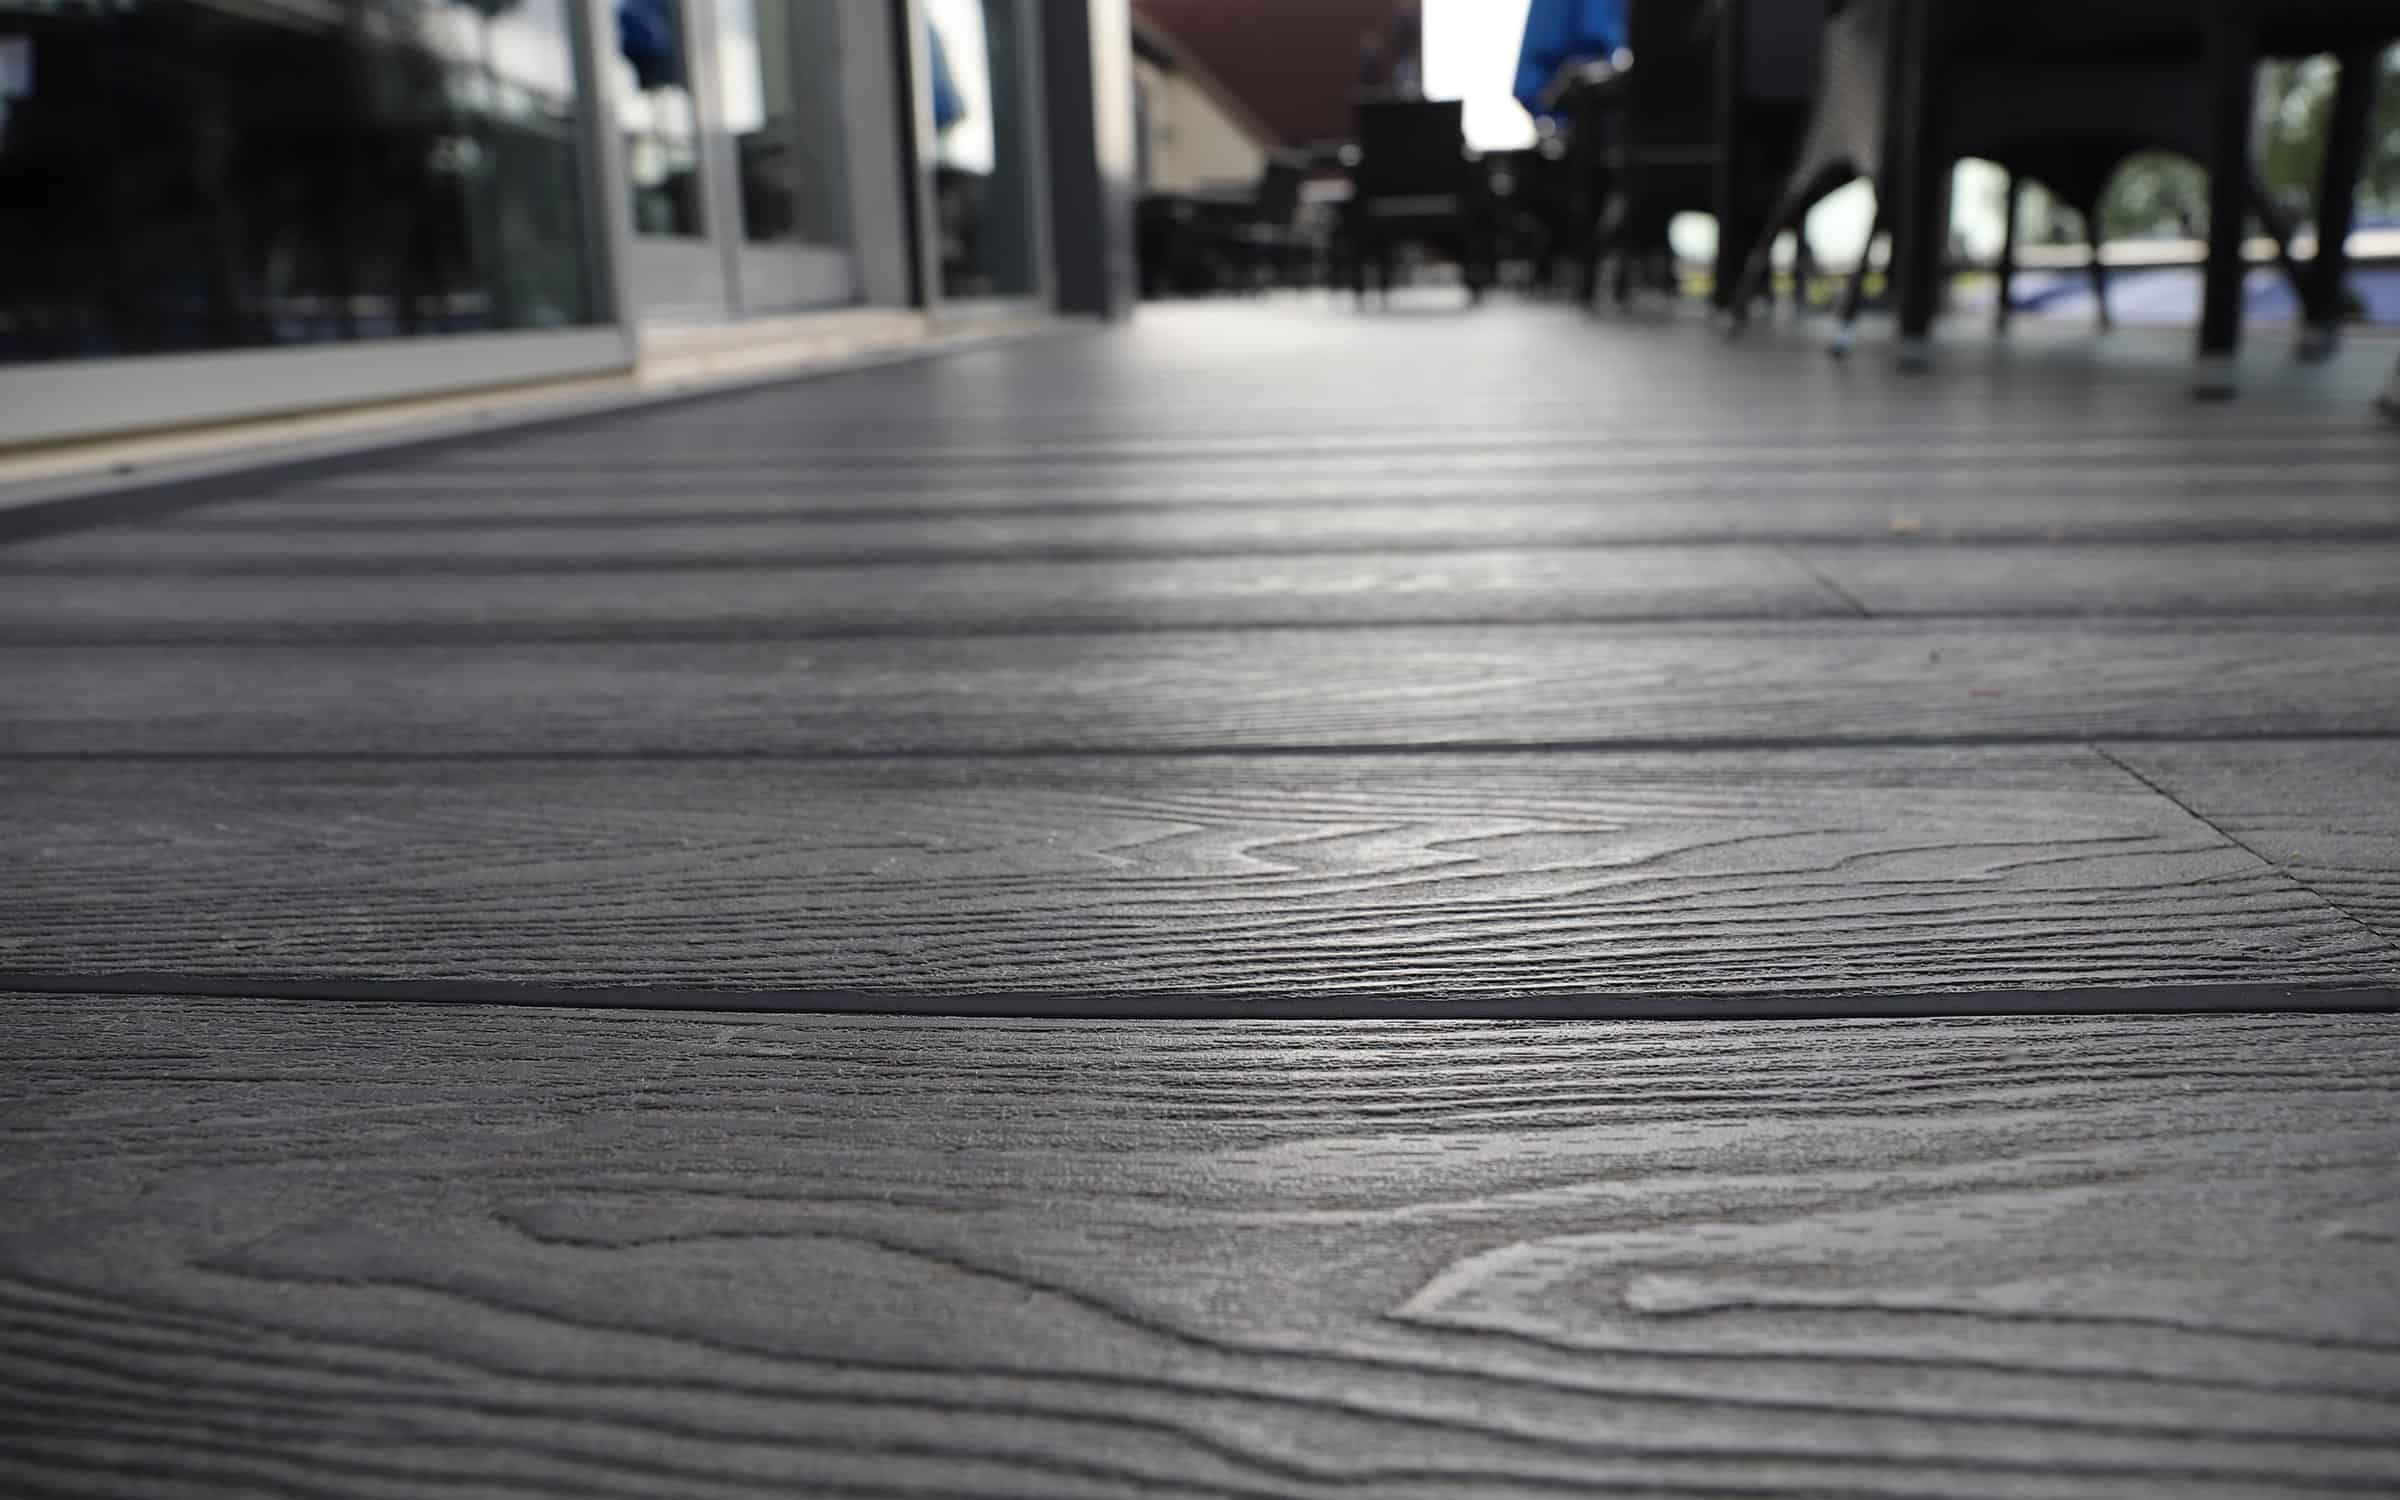 commercial composite decking